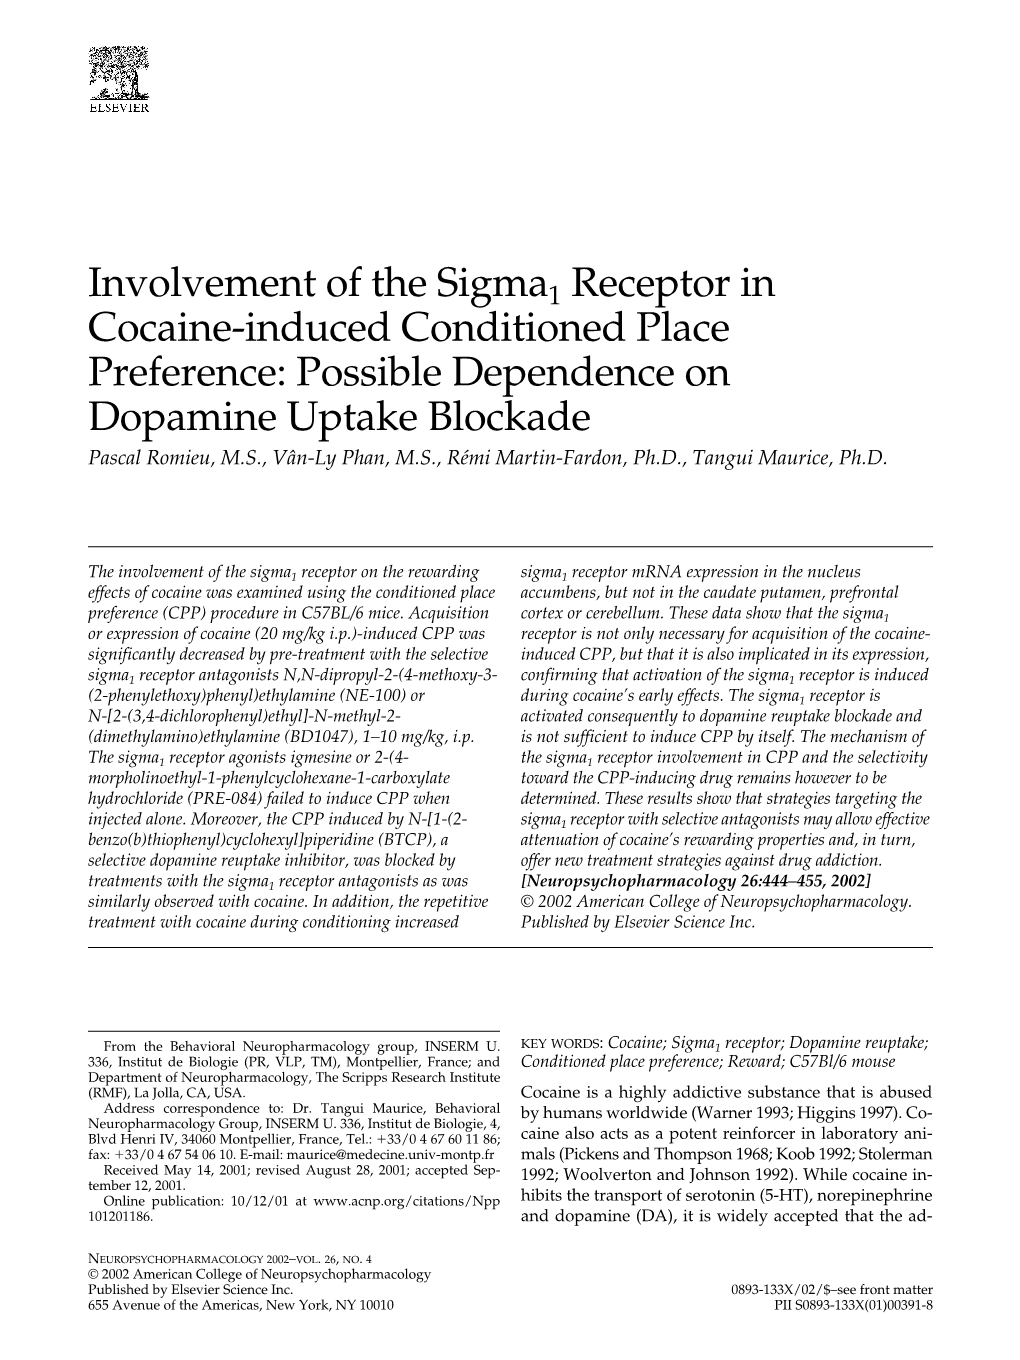 Involvement of the Sigma1 Receptor in Cocaine-Induced Conditioned